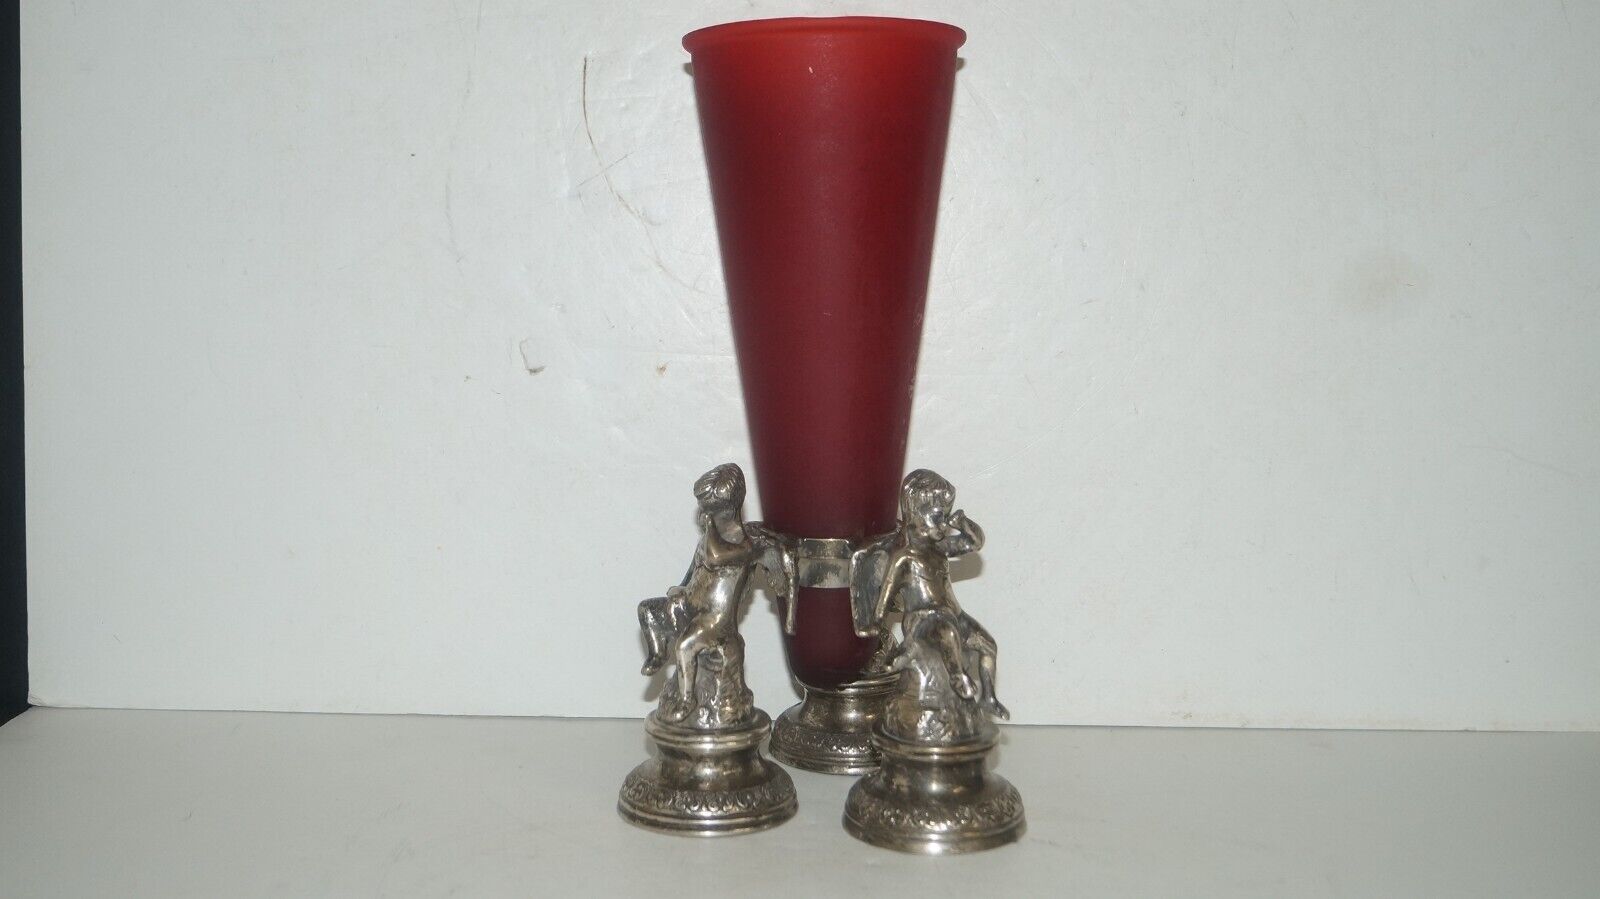 BEAUTIFUL VINTAGE WEEPING CHERUBIM ANGEL BASE WITH RED GLASS CENTER HOME DECOR